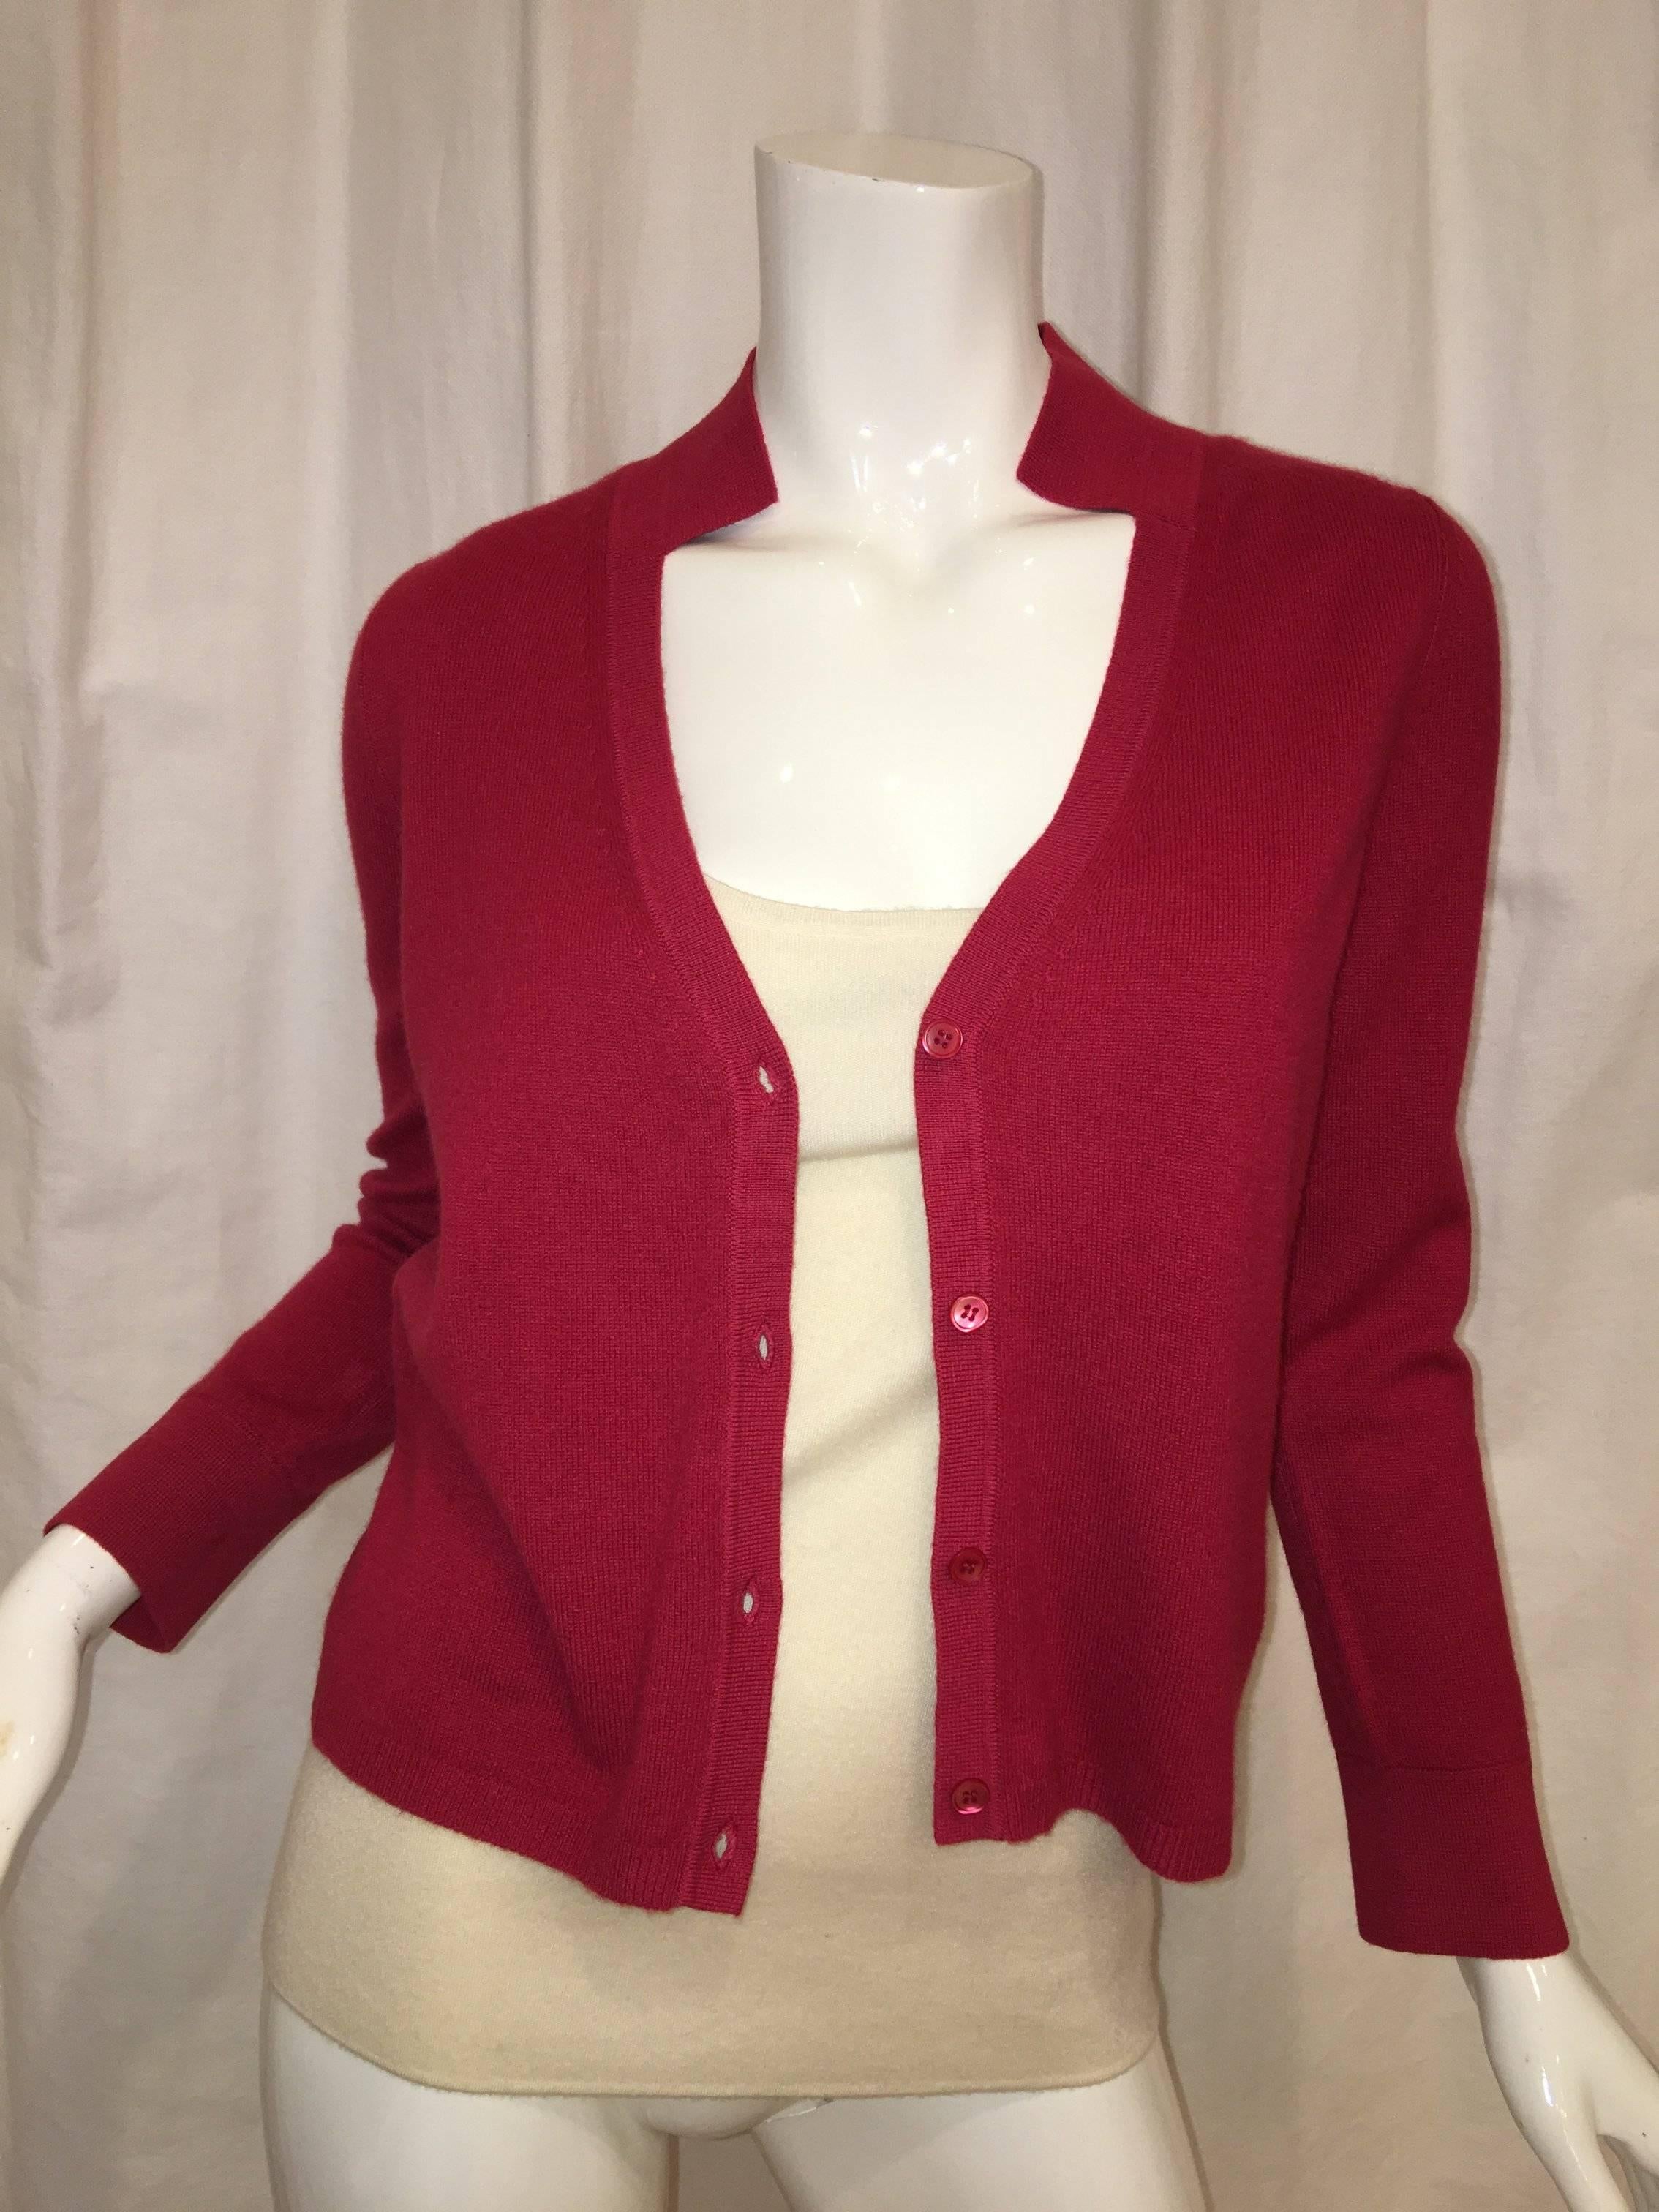 Marni Cashmere Long Sleeve V-Neck Cardigan with Collar and Button Front.